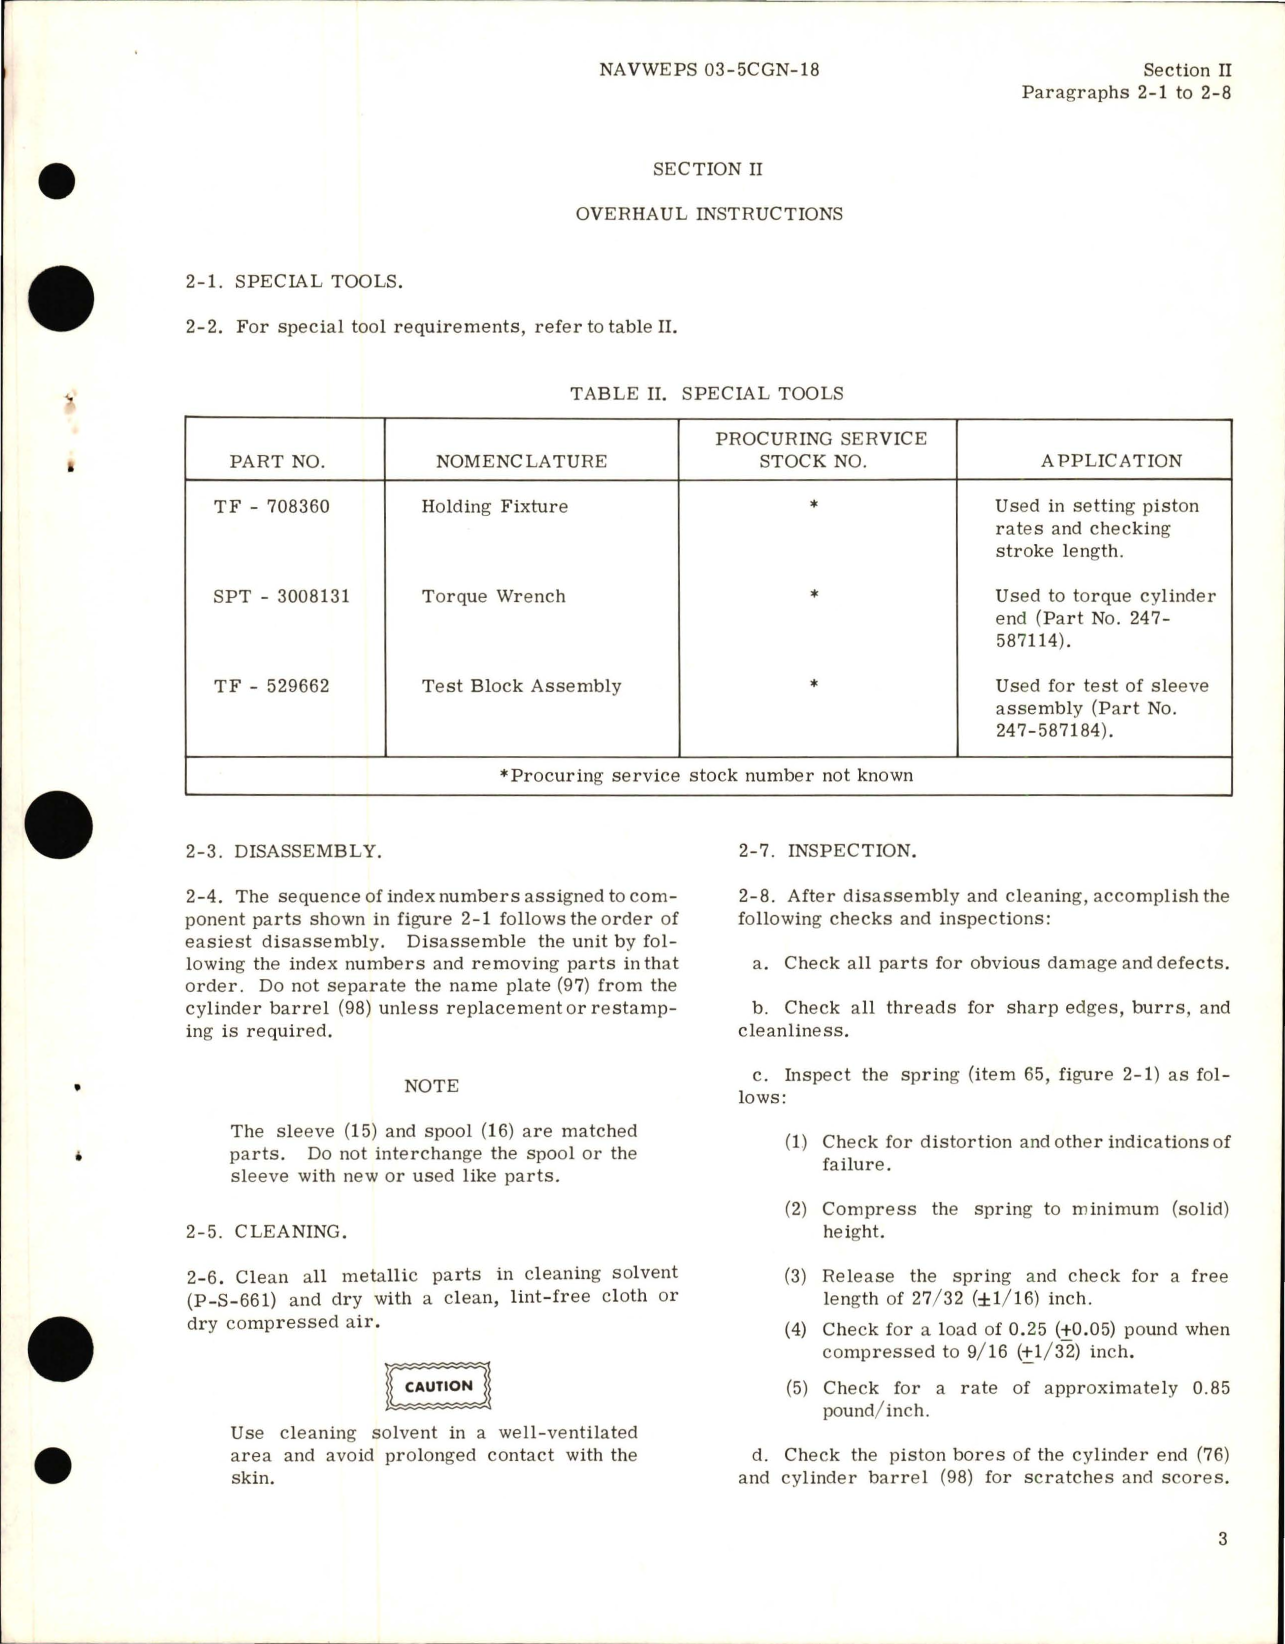 Sample page 5 from AirCorps Library document: Overhaul Instructions for Hydraulic Flap Control Actuator Assemblies - Part 247-58706 Series 